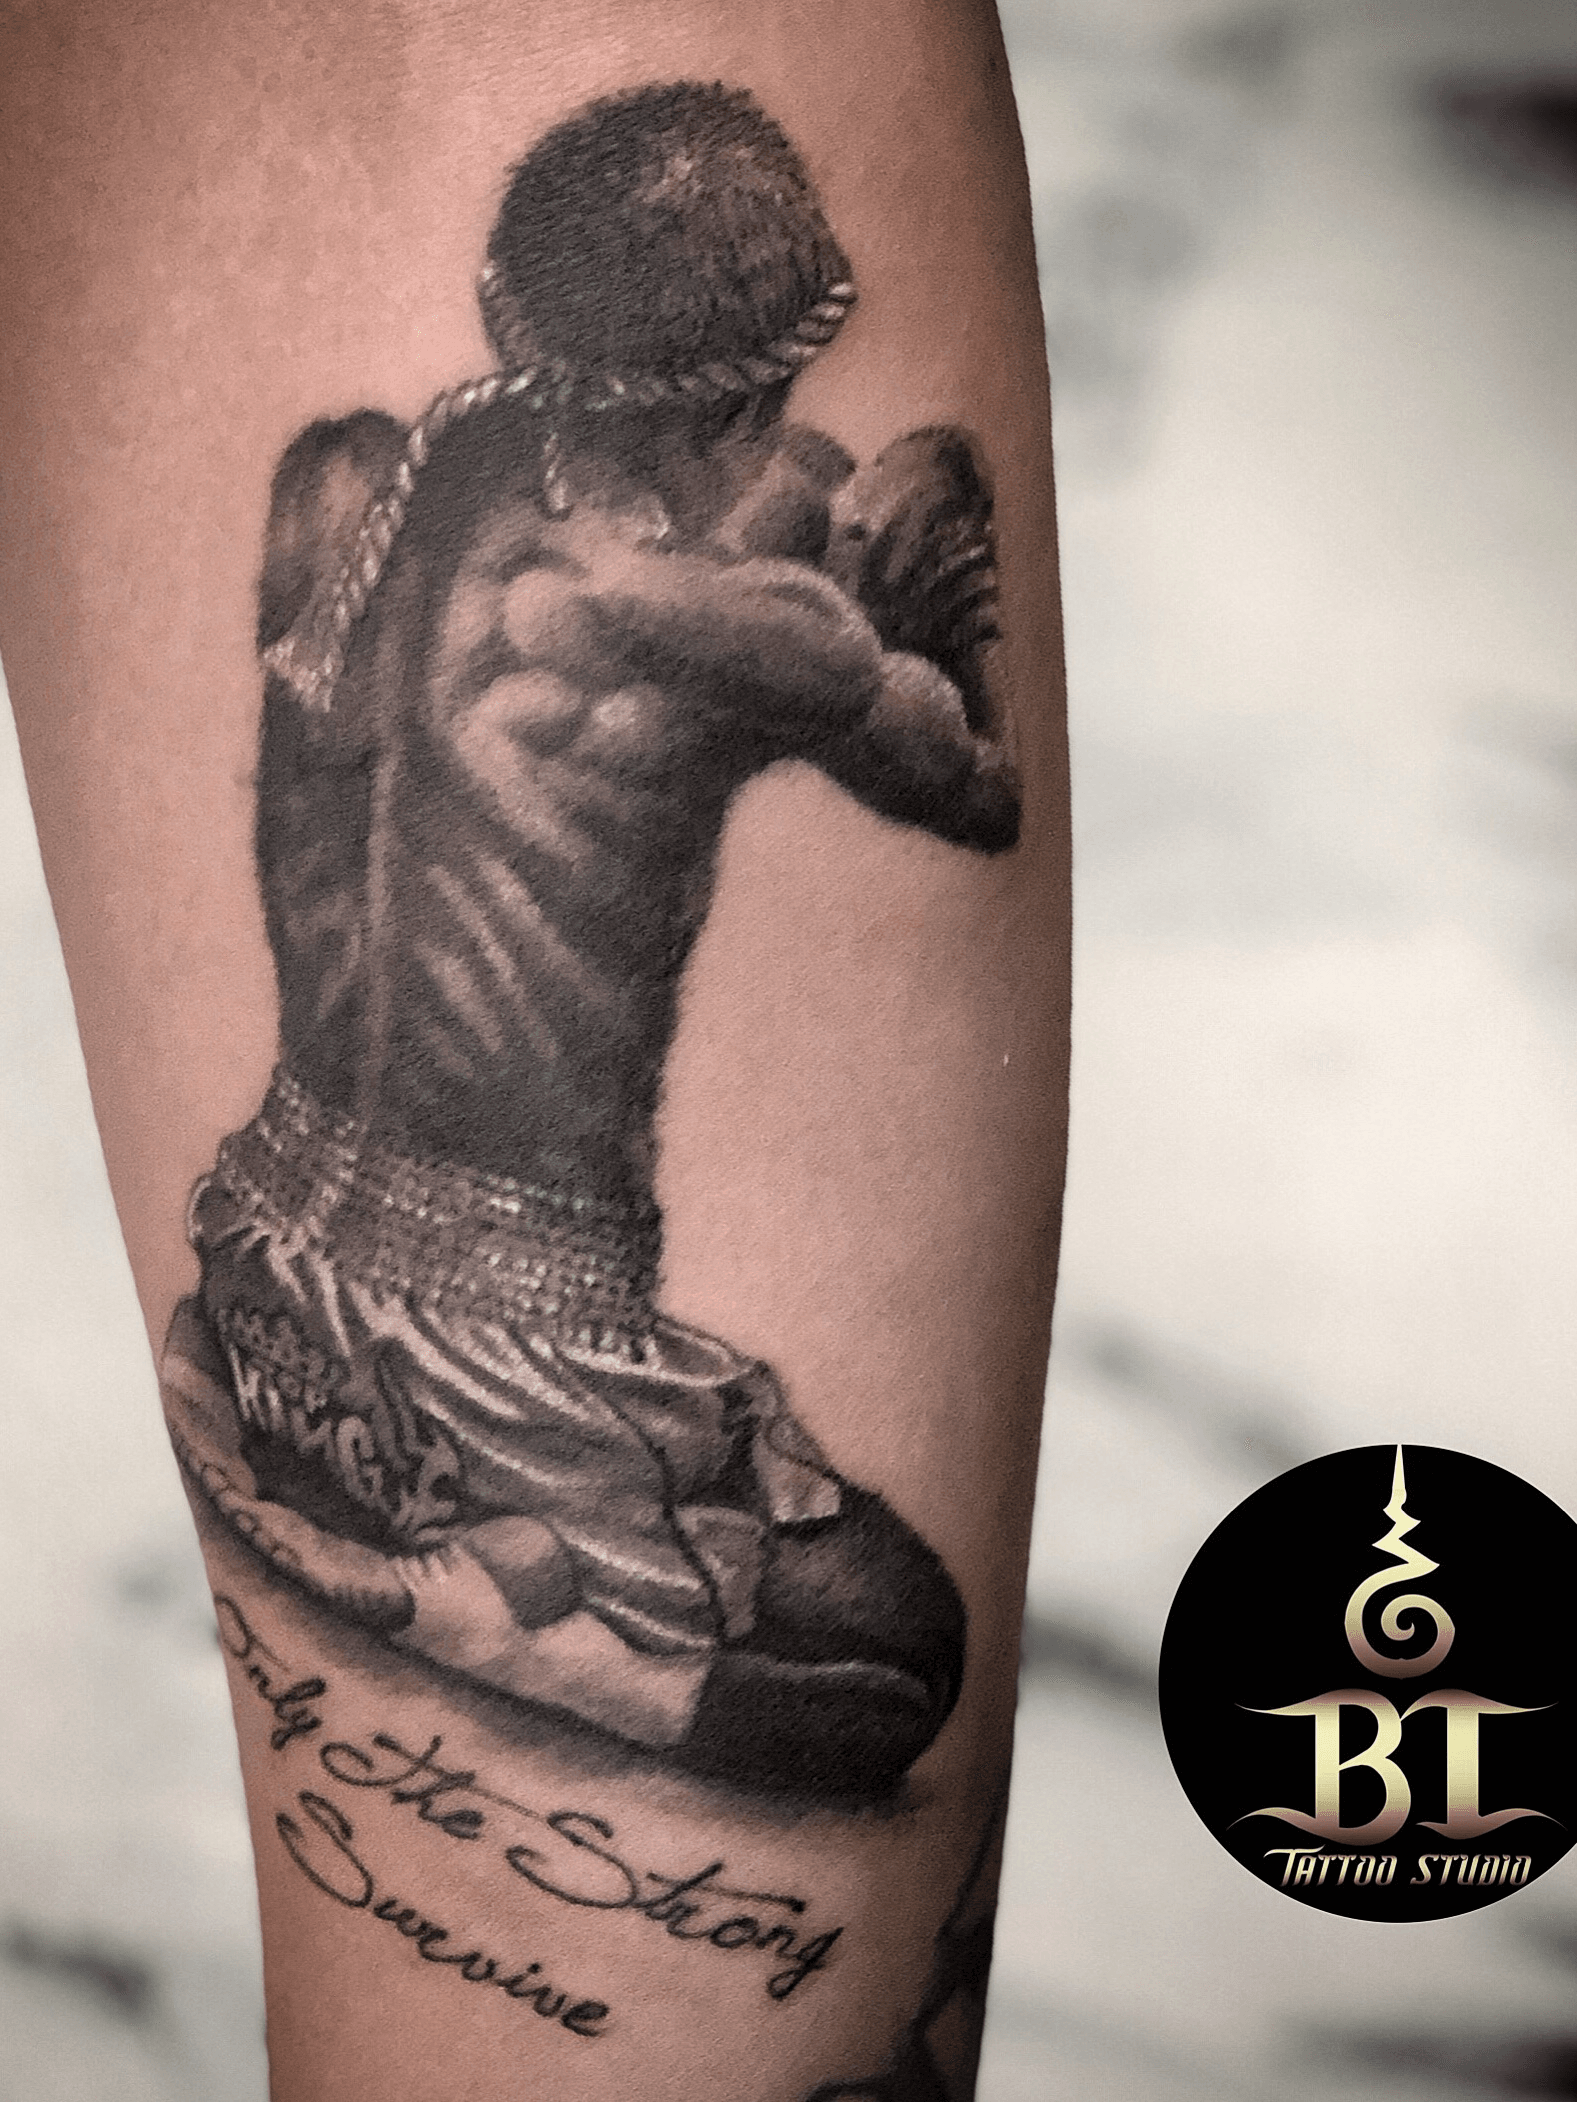 Meanings muay and thai tattoos Muay Thai